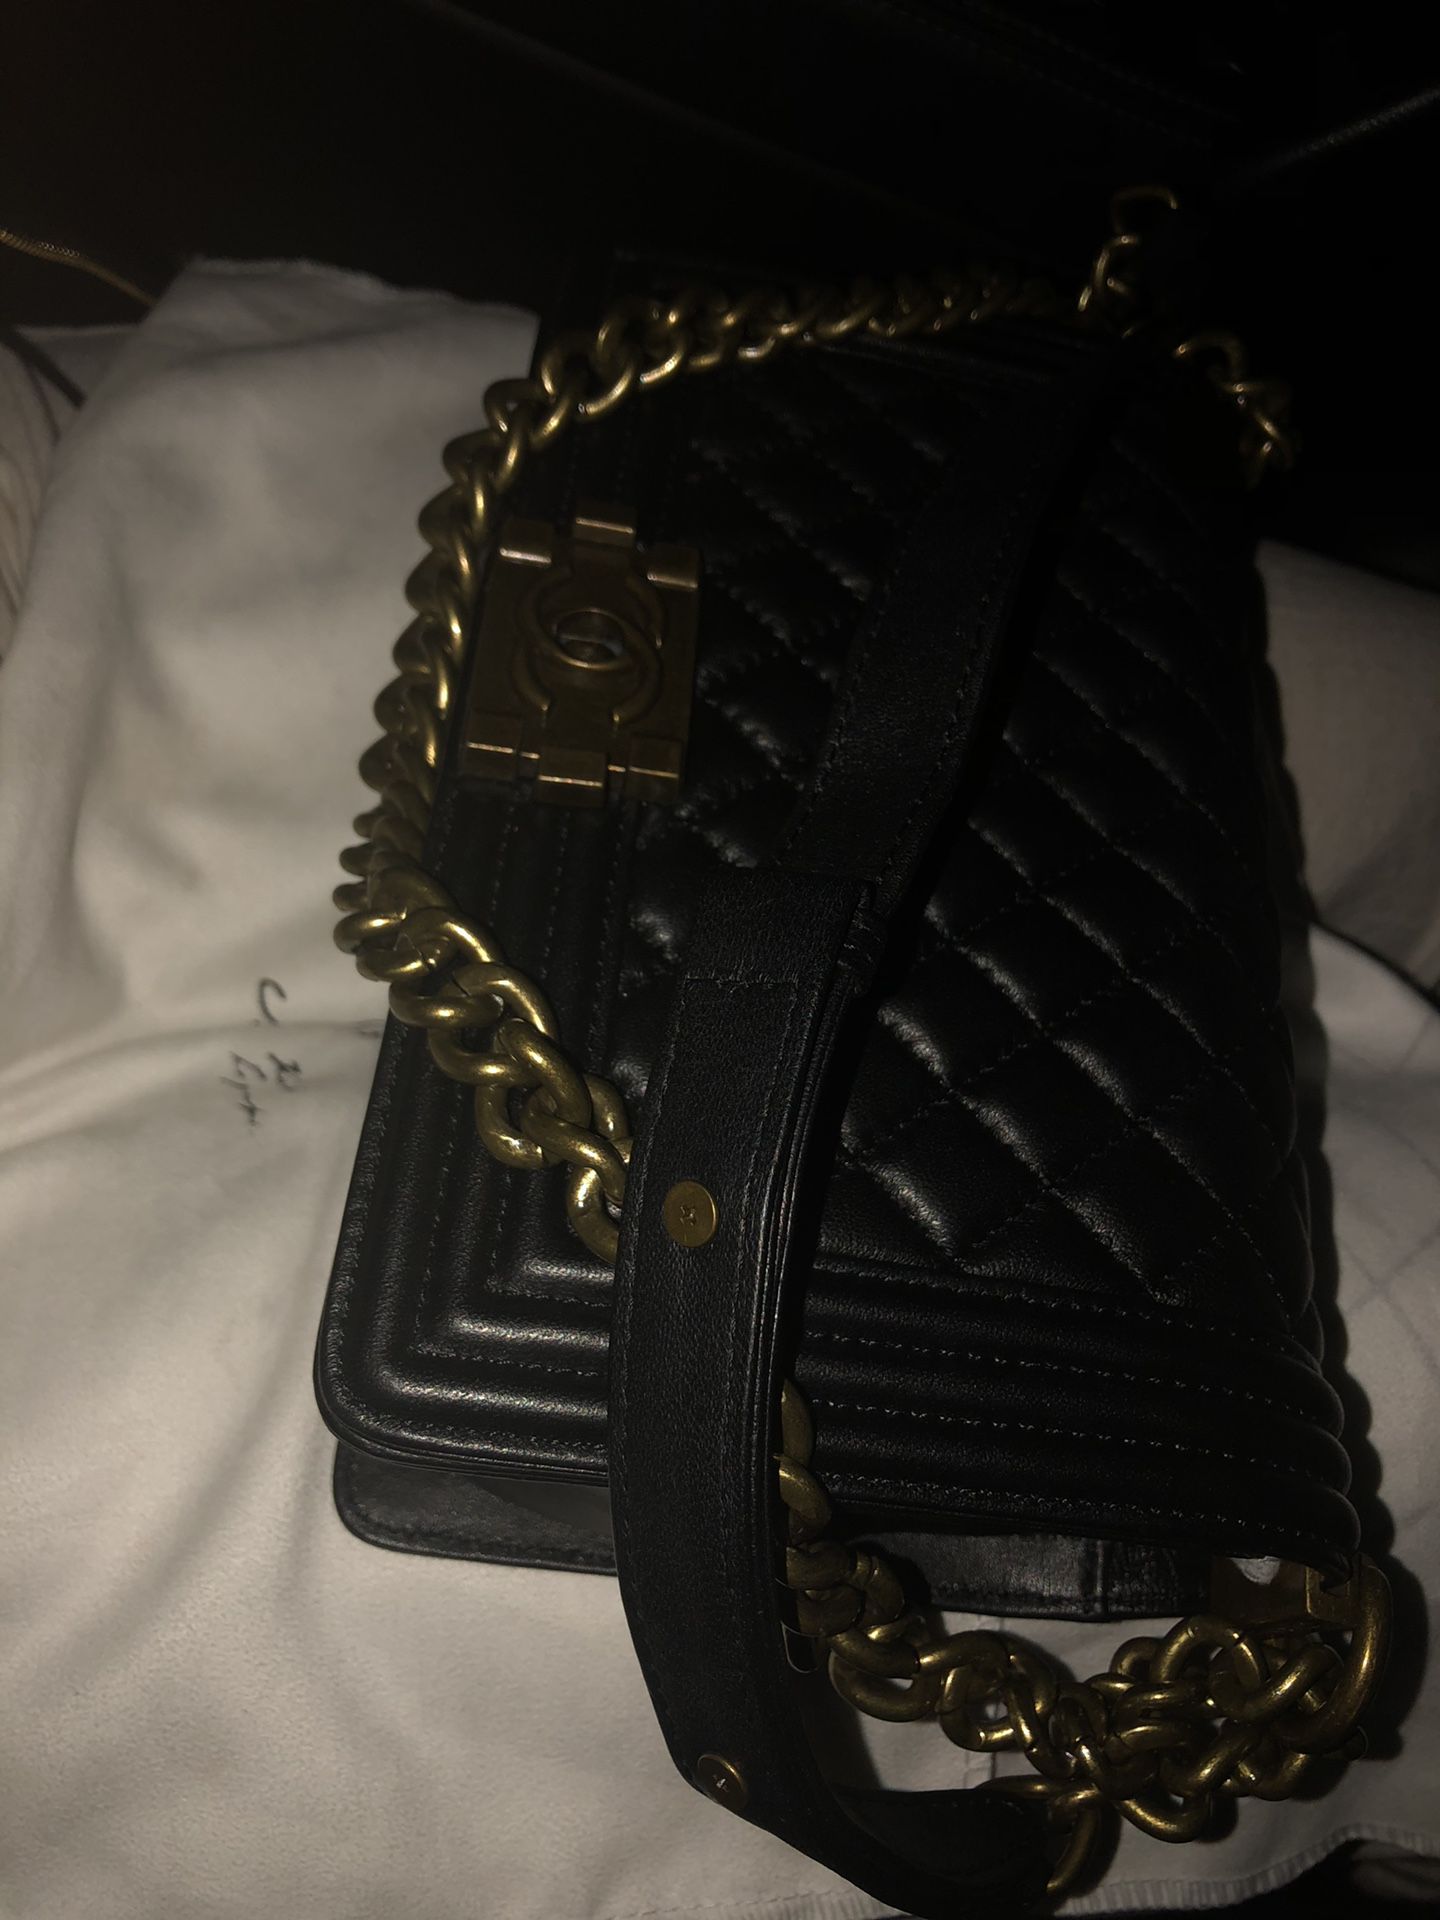 shilling Jeg var overrasket Hensigt Chanel Boy Bag with Brass gold hardware. Able to ship out today! 10218184  Serial date code for Sale in Port Washington, NY - OfferUp